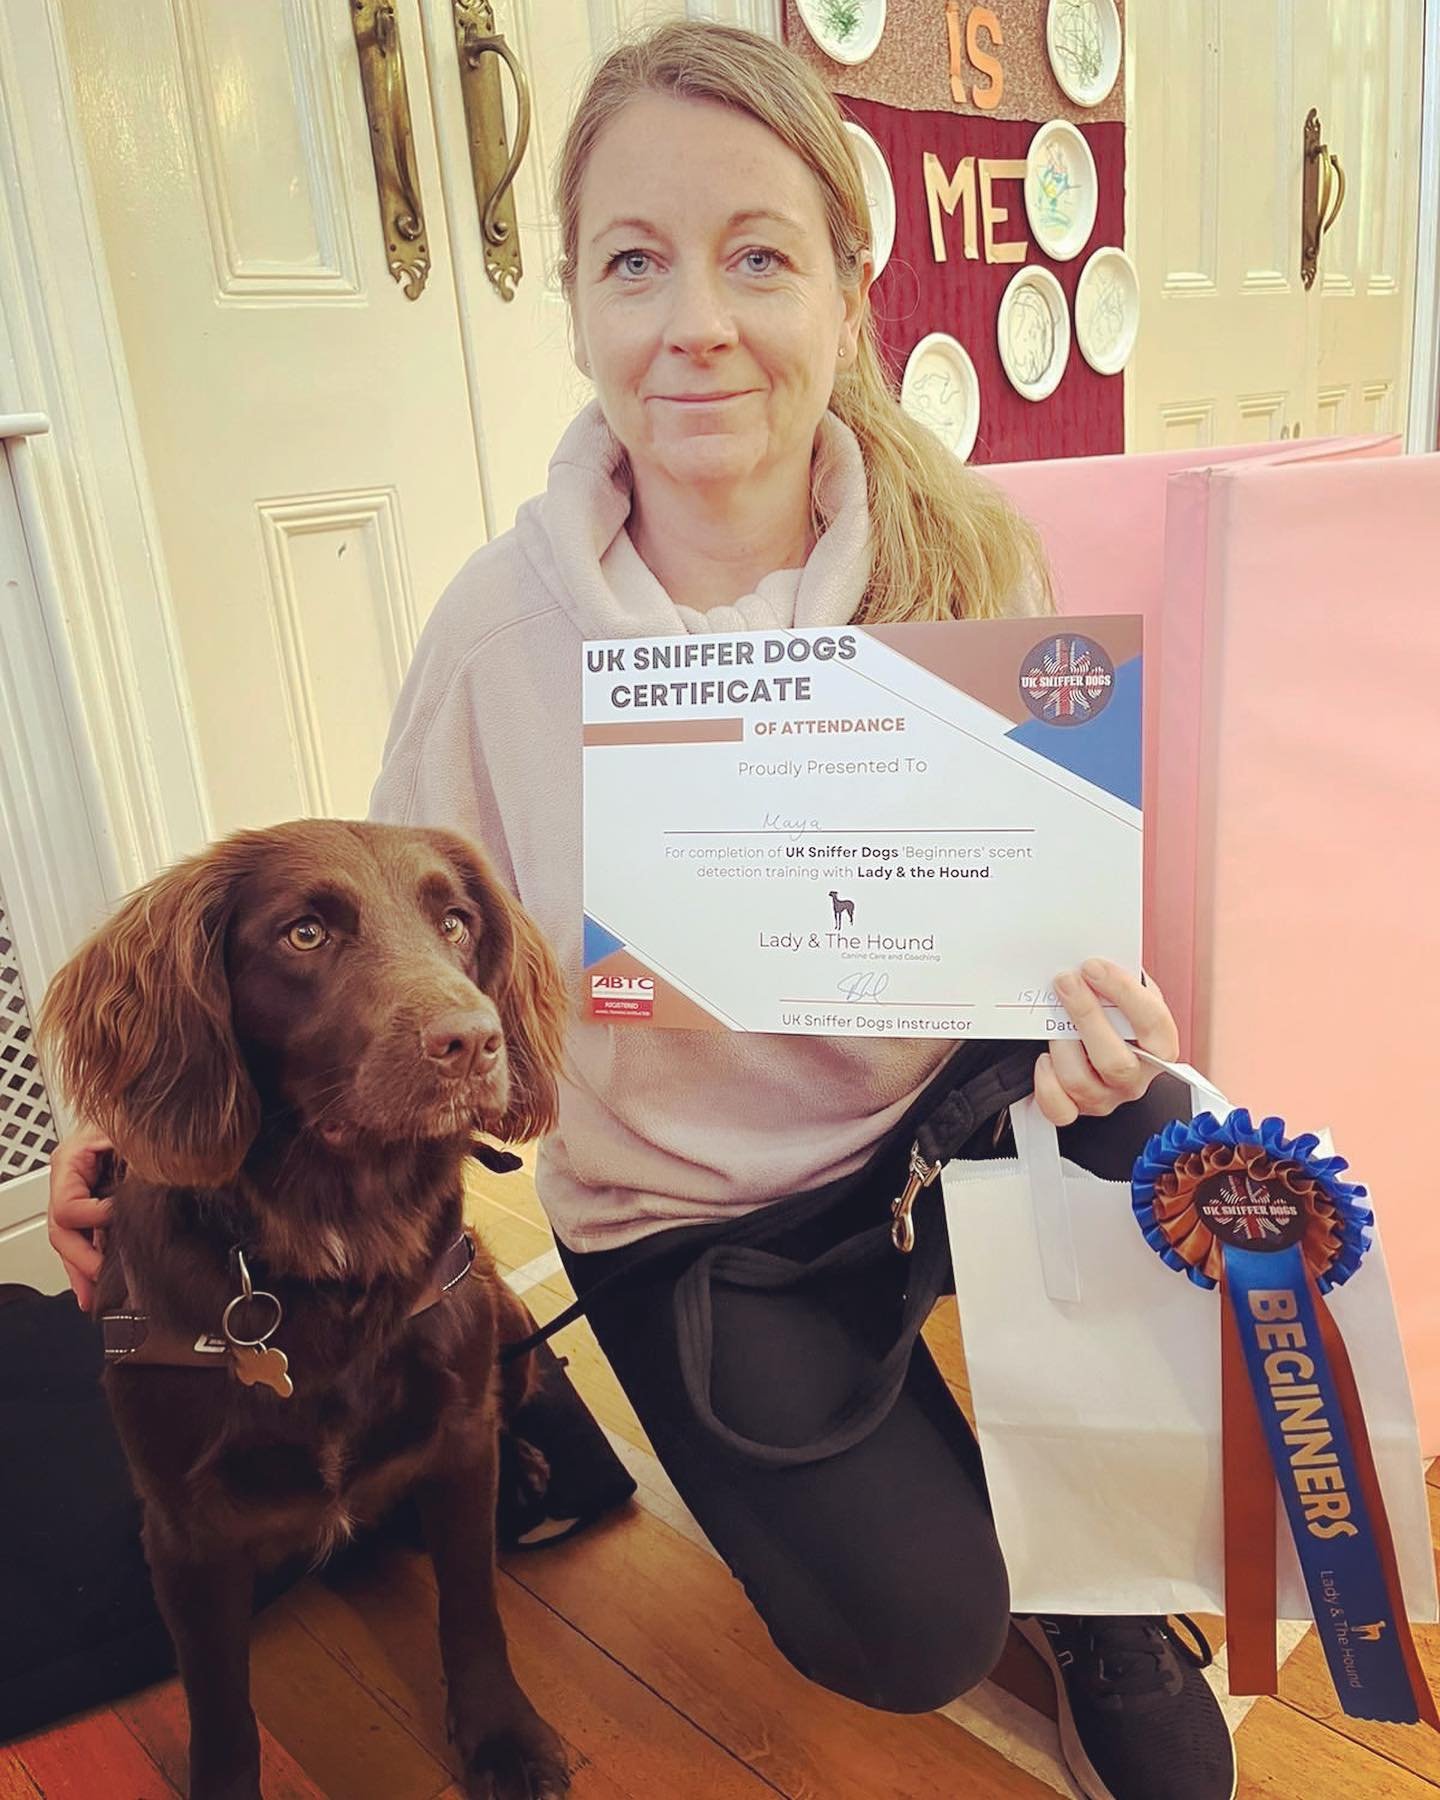 Huge congrats to my girl gang of sniffer dog graduates from Richmond 🎓🎓🎓

So proud of teams 👉🏻

⭐️ Maya (who won first place in the group time trial!)
⭐️ Lucy (our senior gal who at 12 years old nailed second place!)
⭐️ Coco (who gained an excel